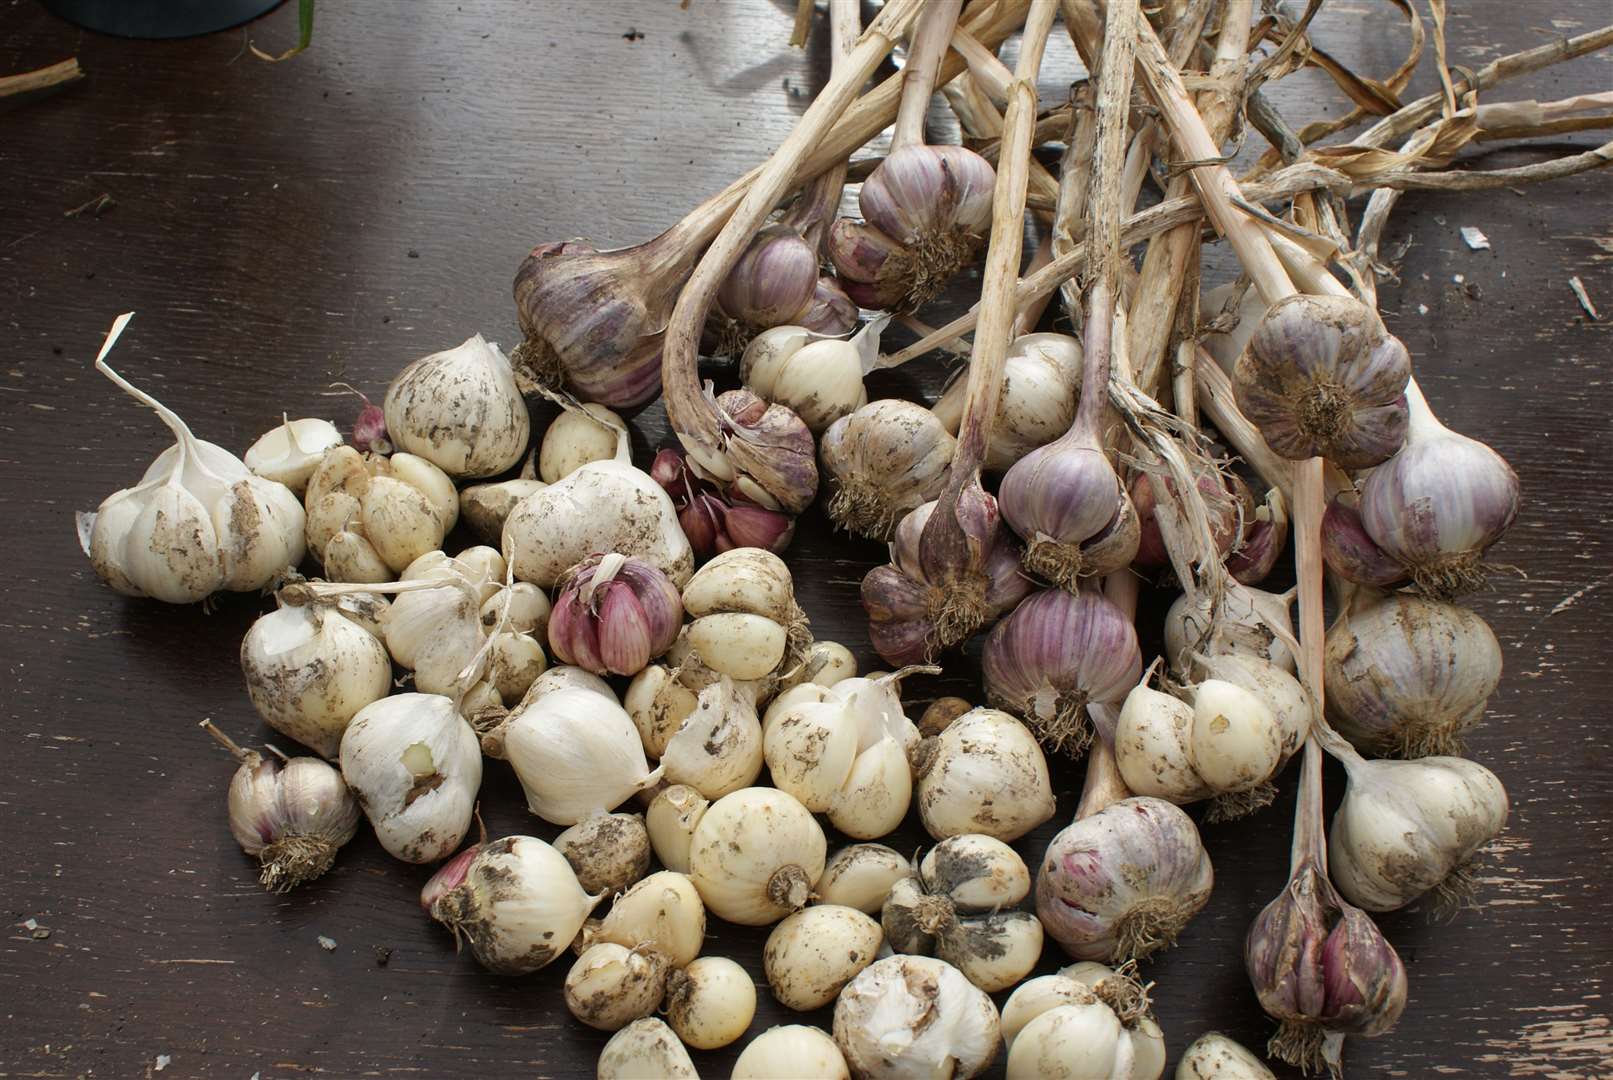 Traditionally Halloween is the time to plant garlic.